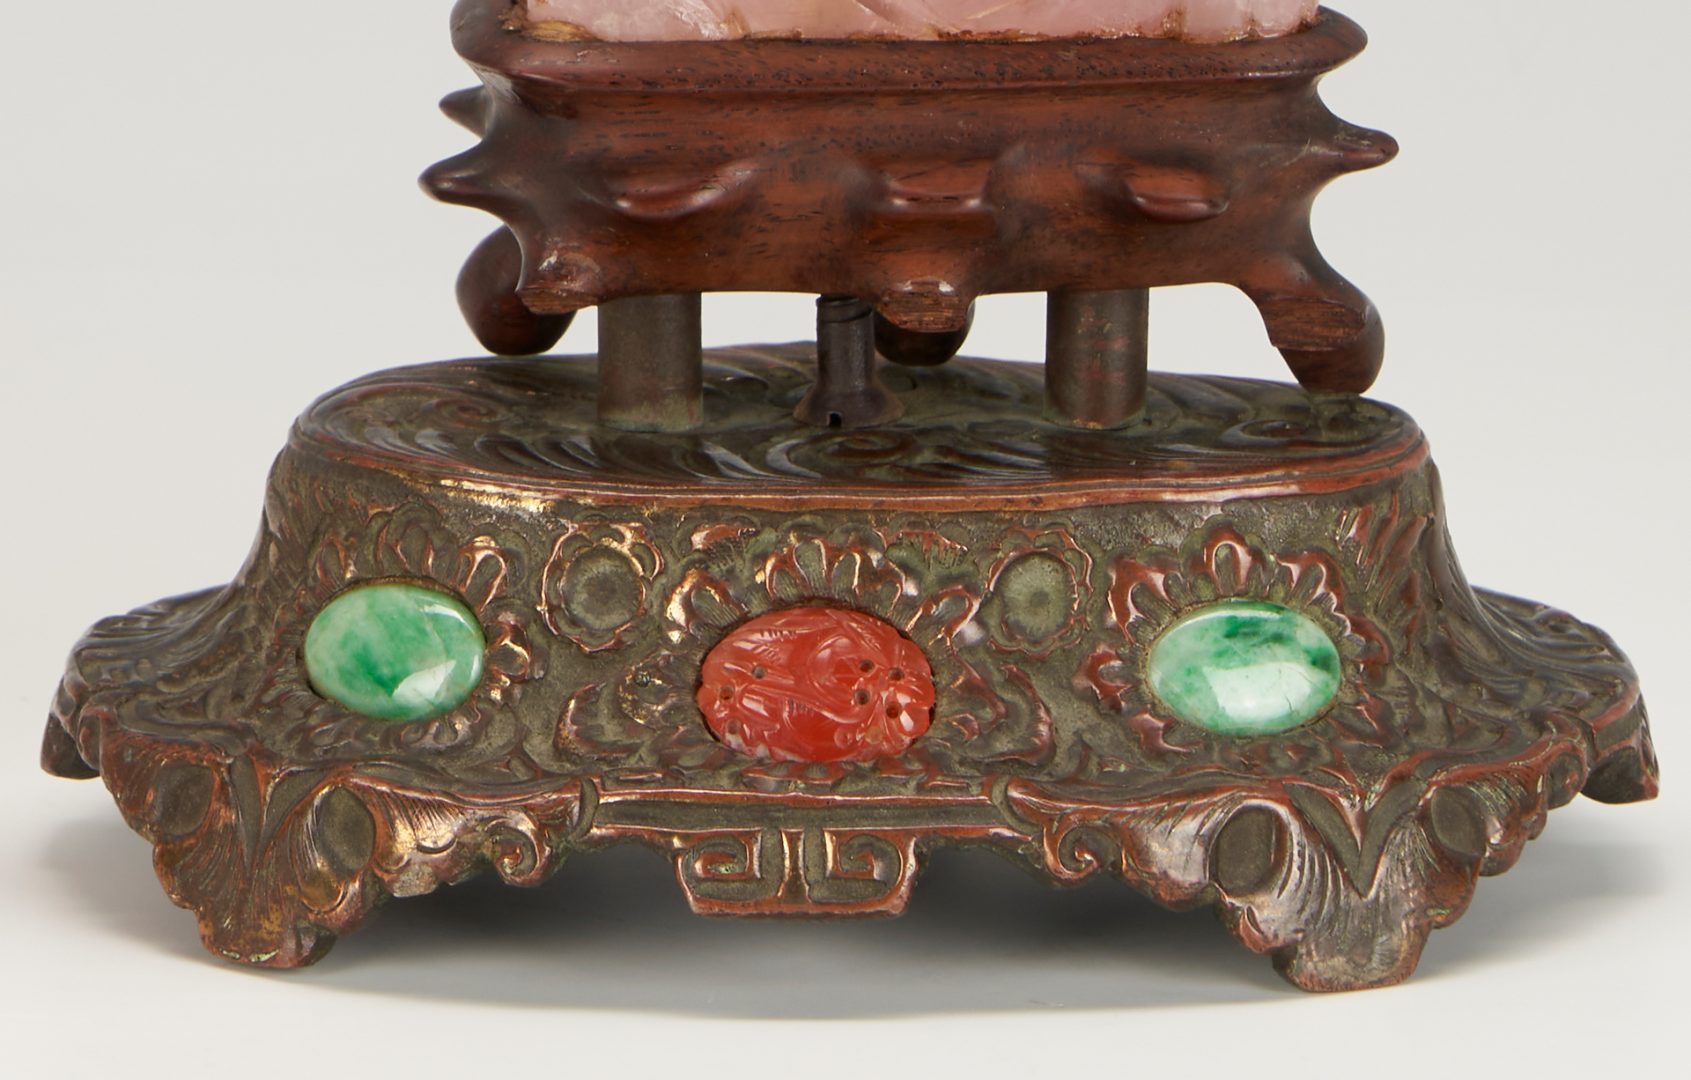 Lot 1048: 2 Chinese Rose Quartz Carvings plus Jeweled Bronze Stand